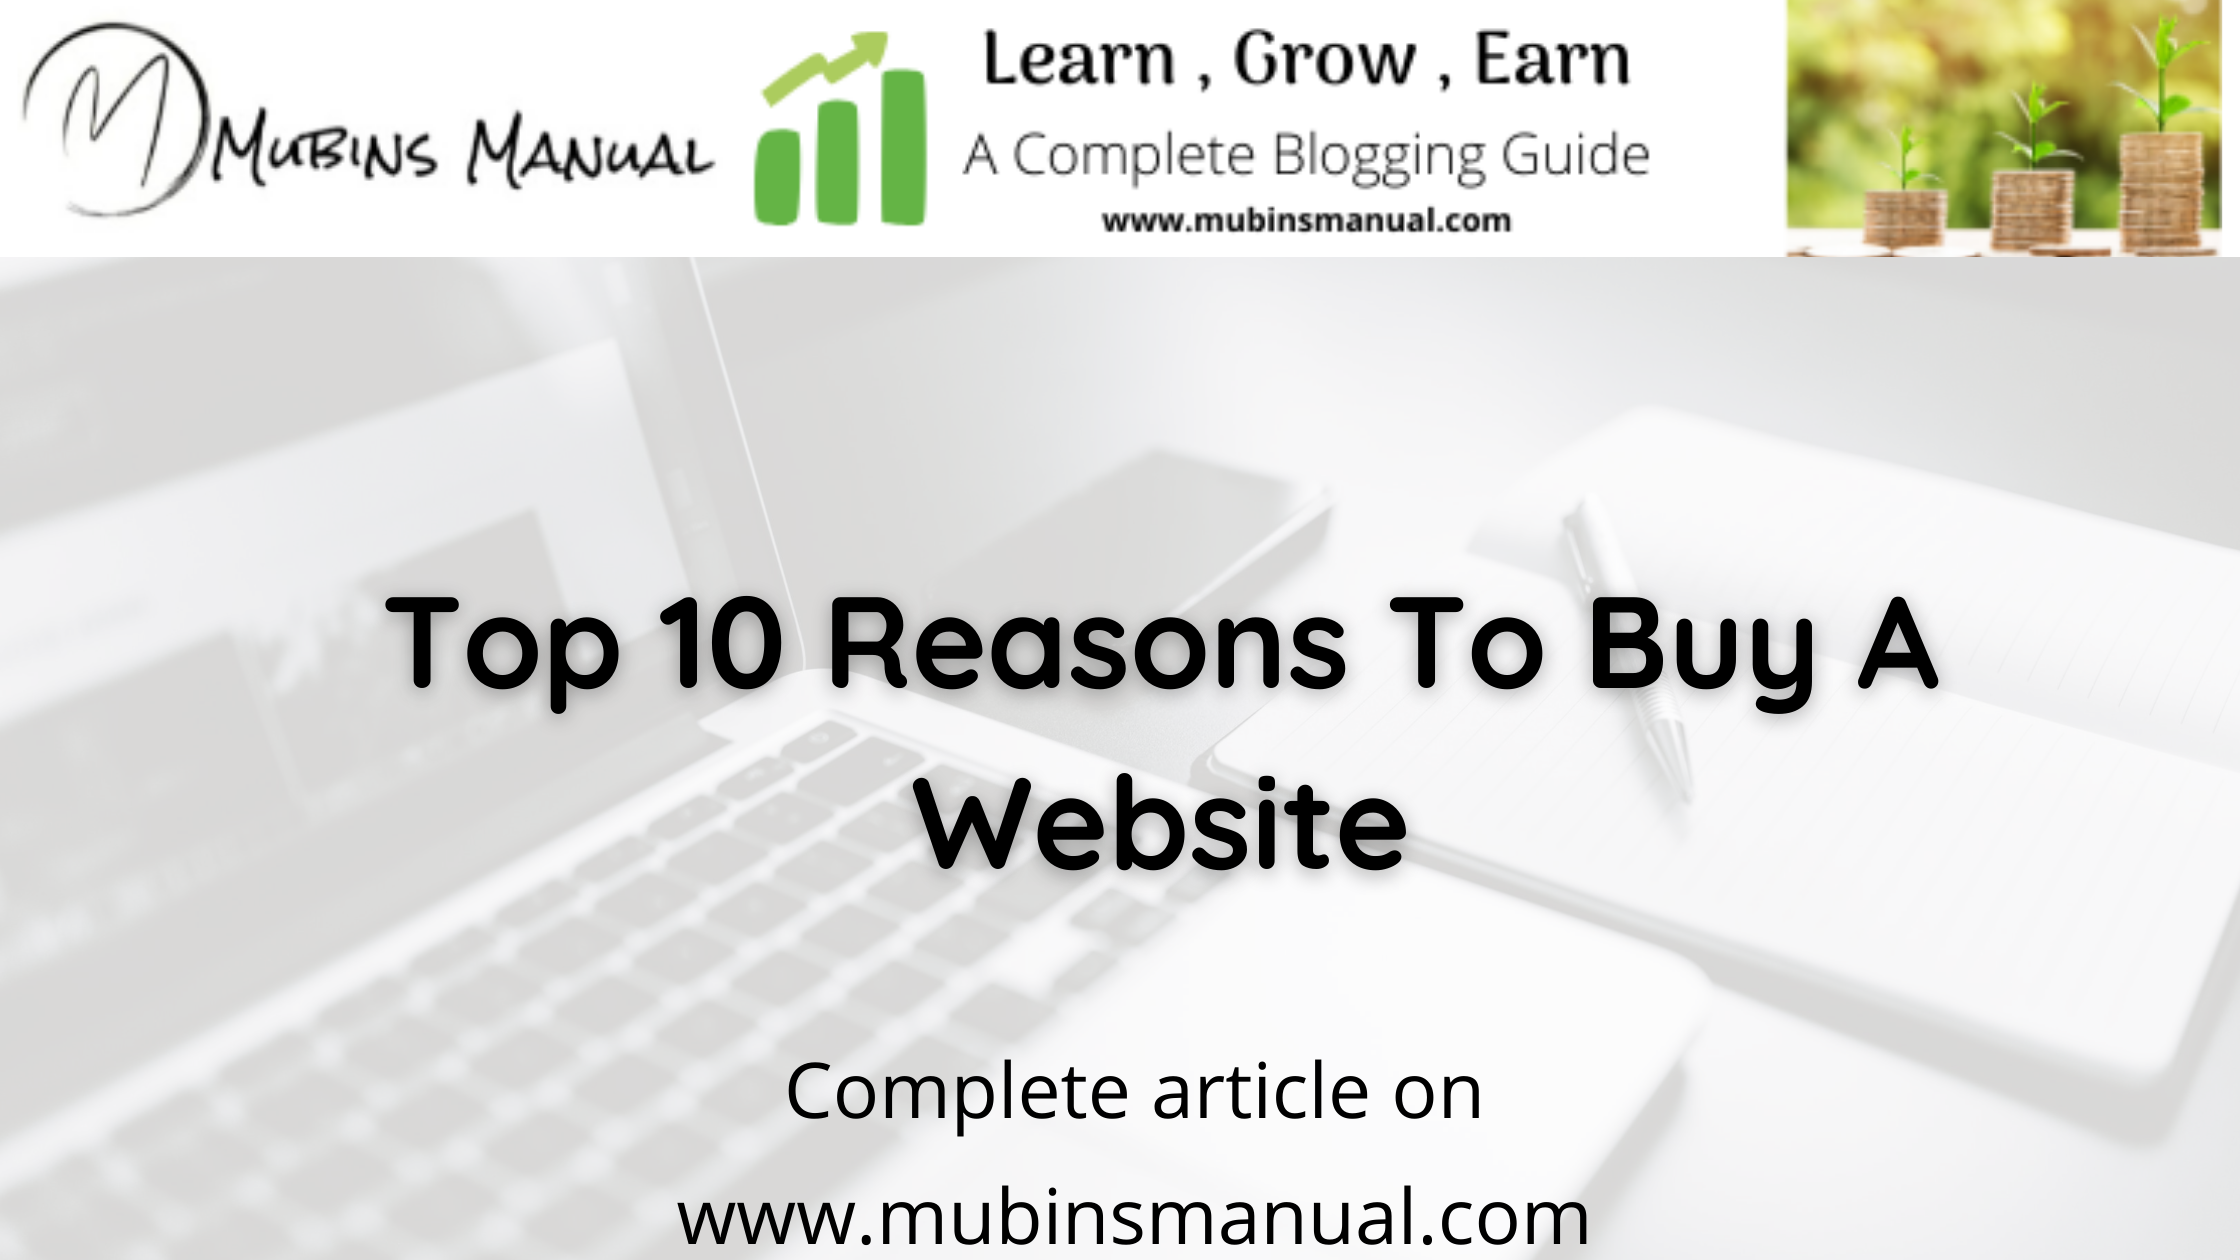 Why Should I Buy A Website -Top 10 Reasons To Buy A Website For Blog